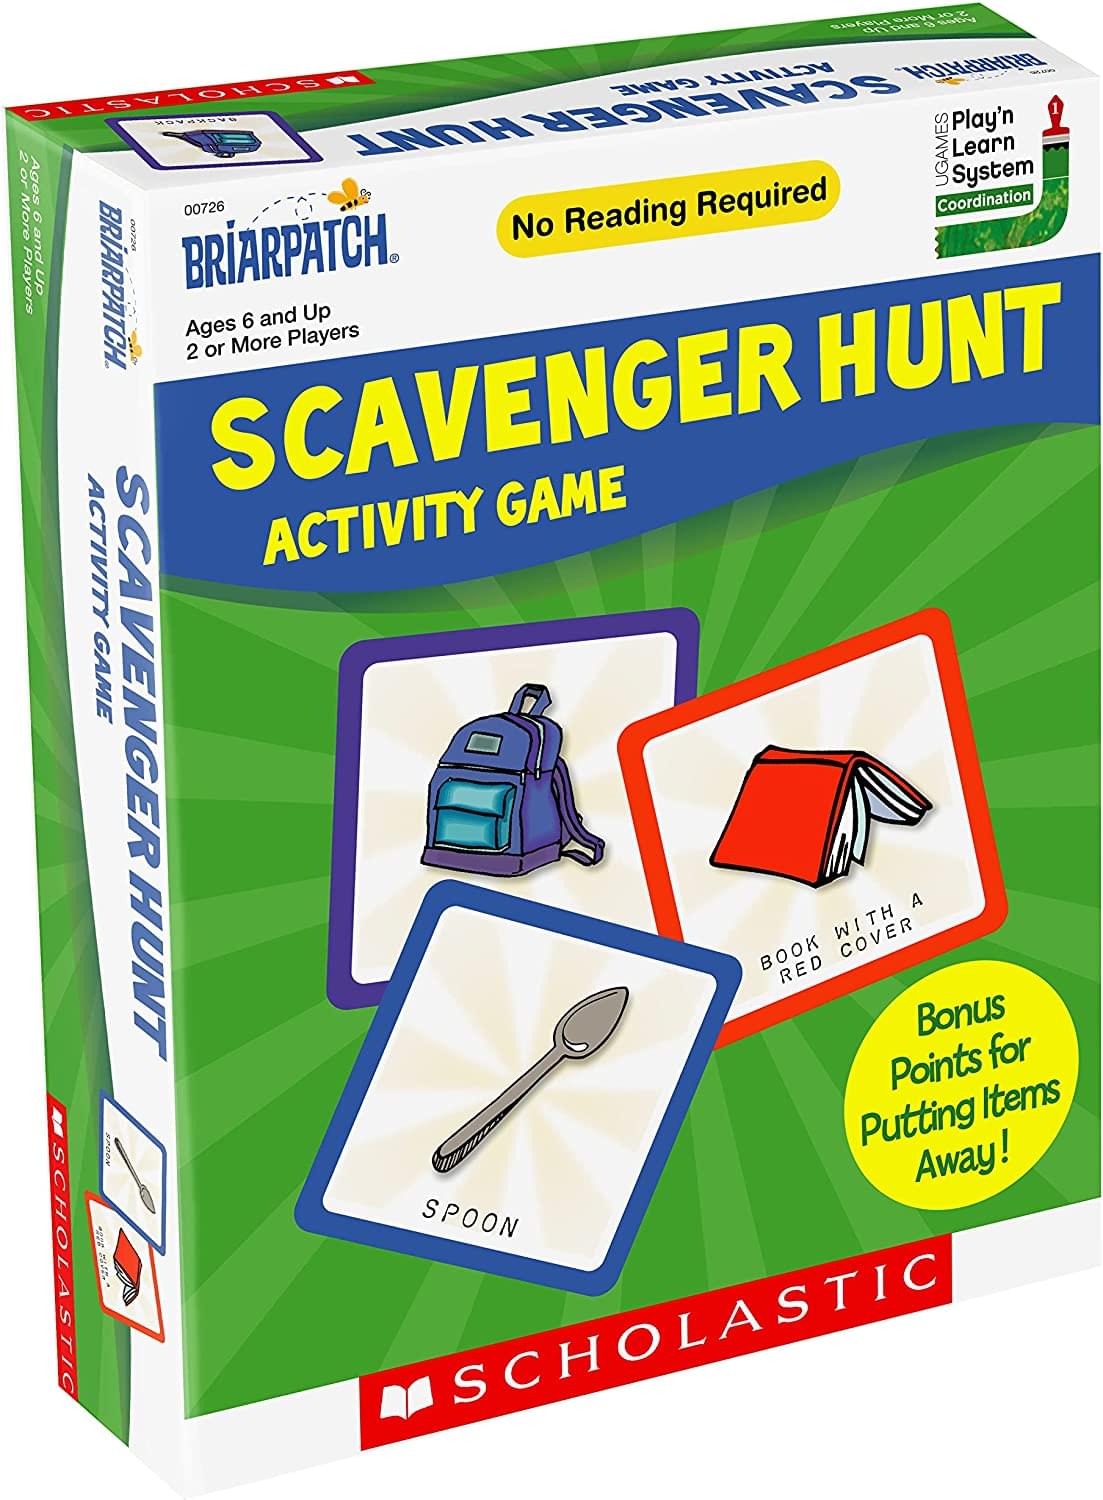 Scholastic Early Learning Scavenger Hunt Activity Game